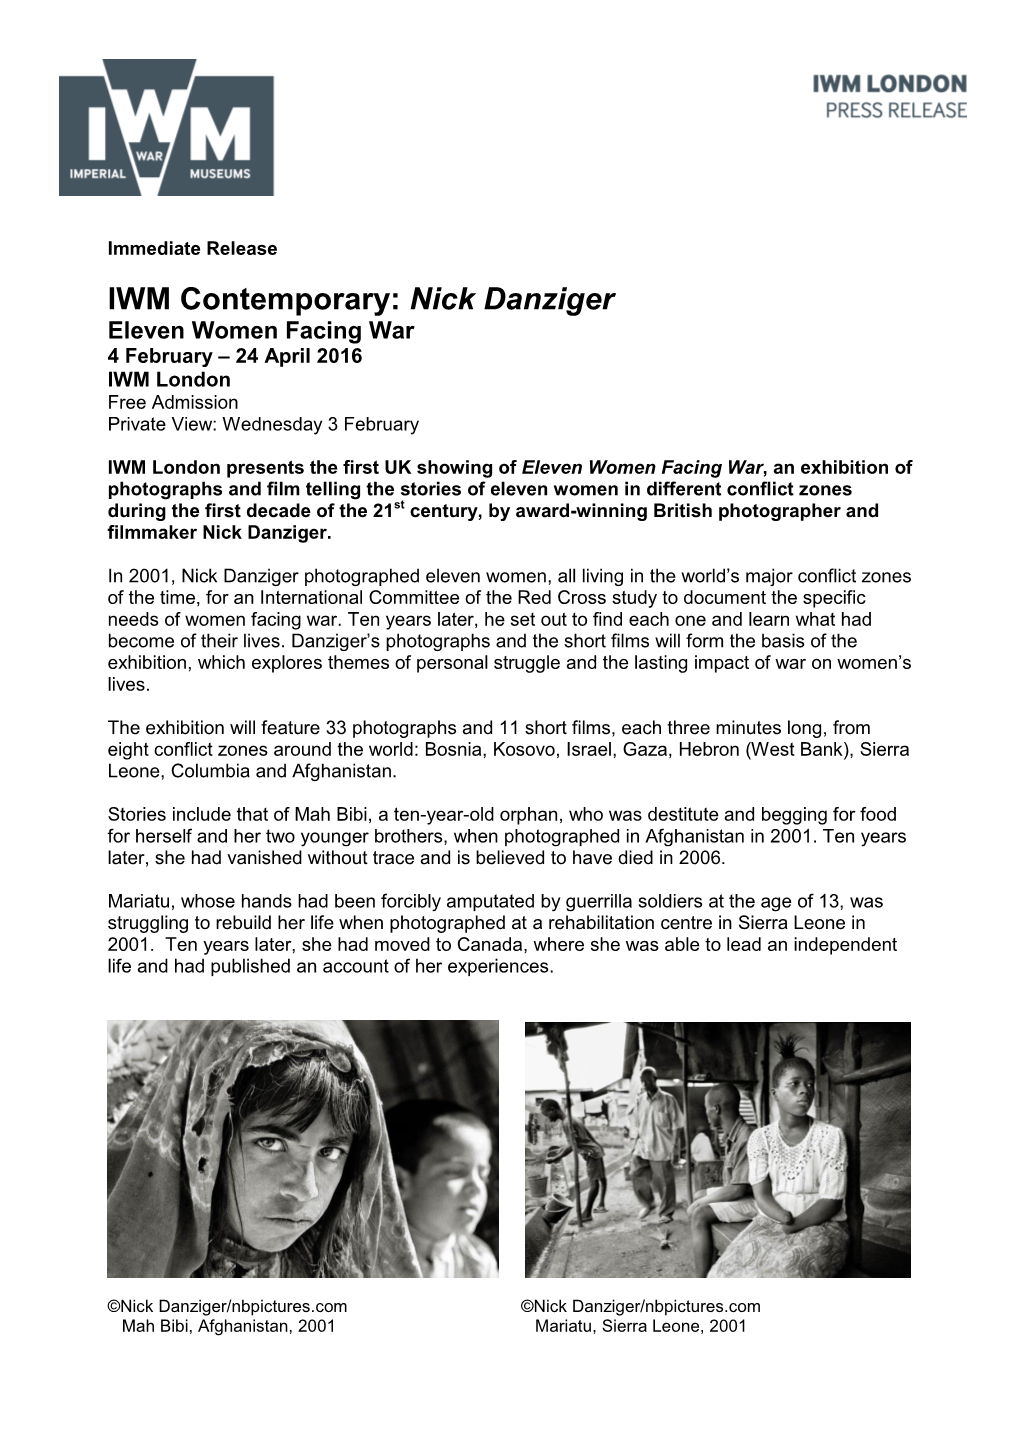 IWM Contemporary: Nick Danziger Eleven Women Facing War 4 February – 24 April 2016 IWM London Free Admission Private View: Wednesday 3 February